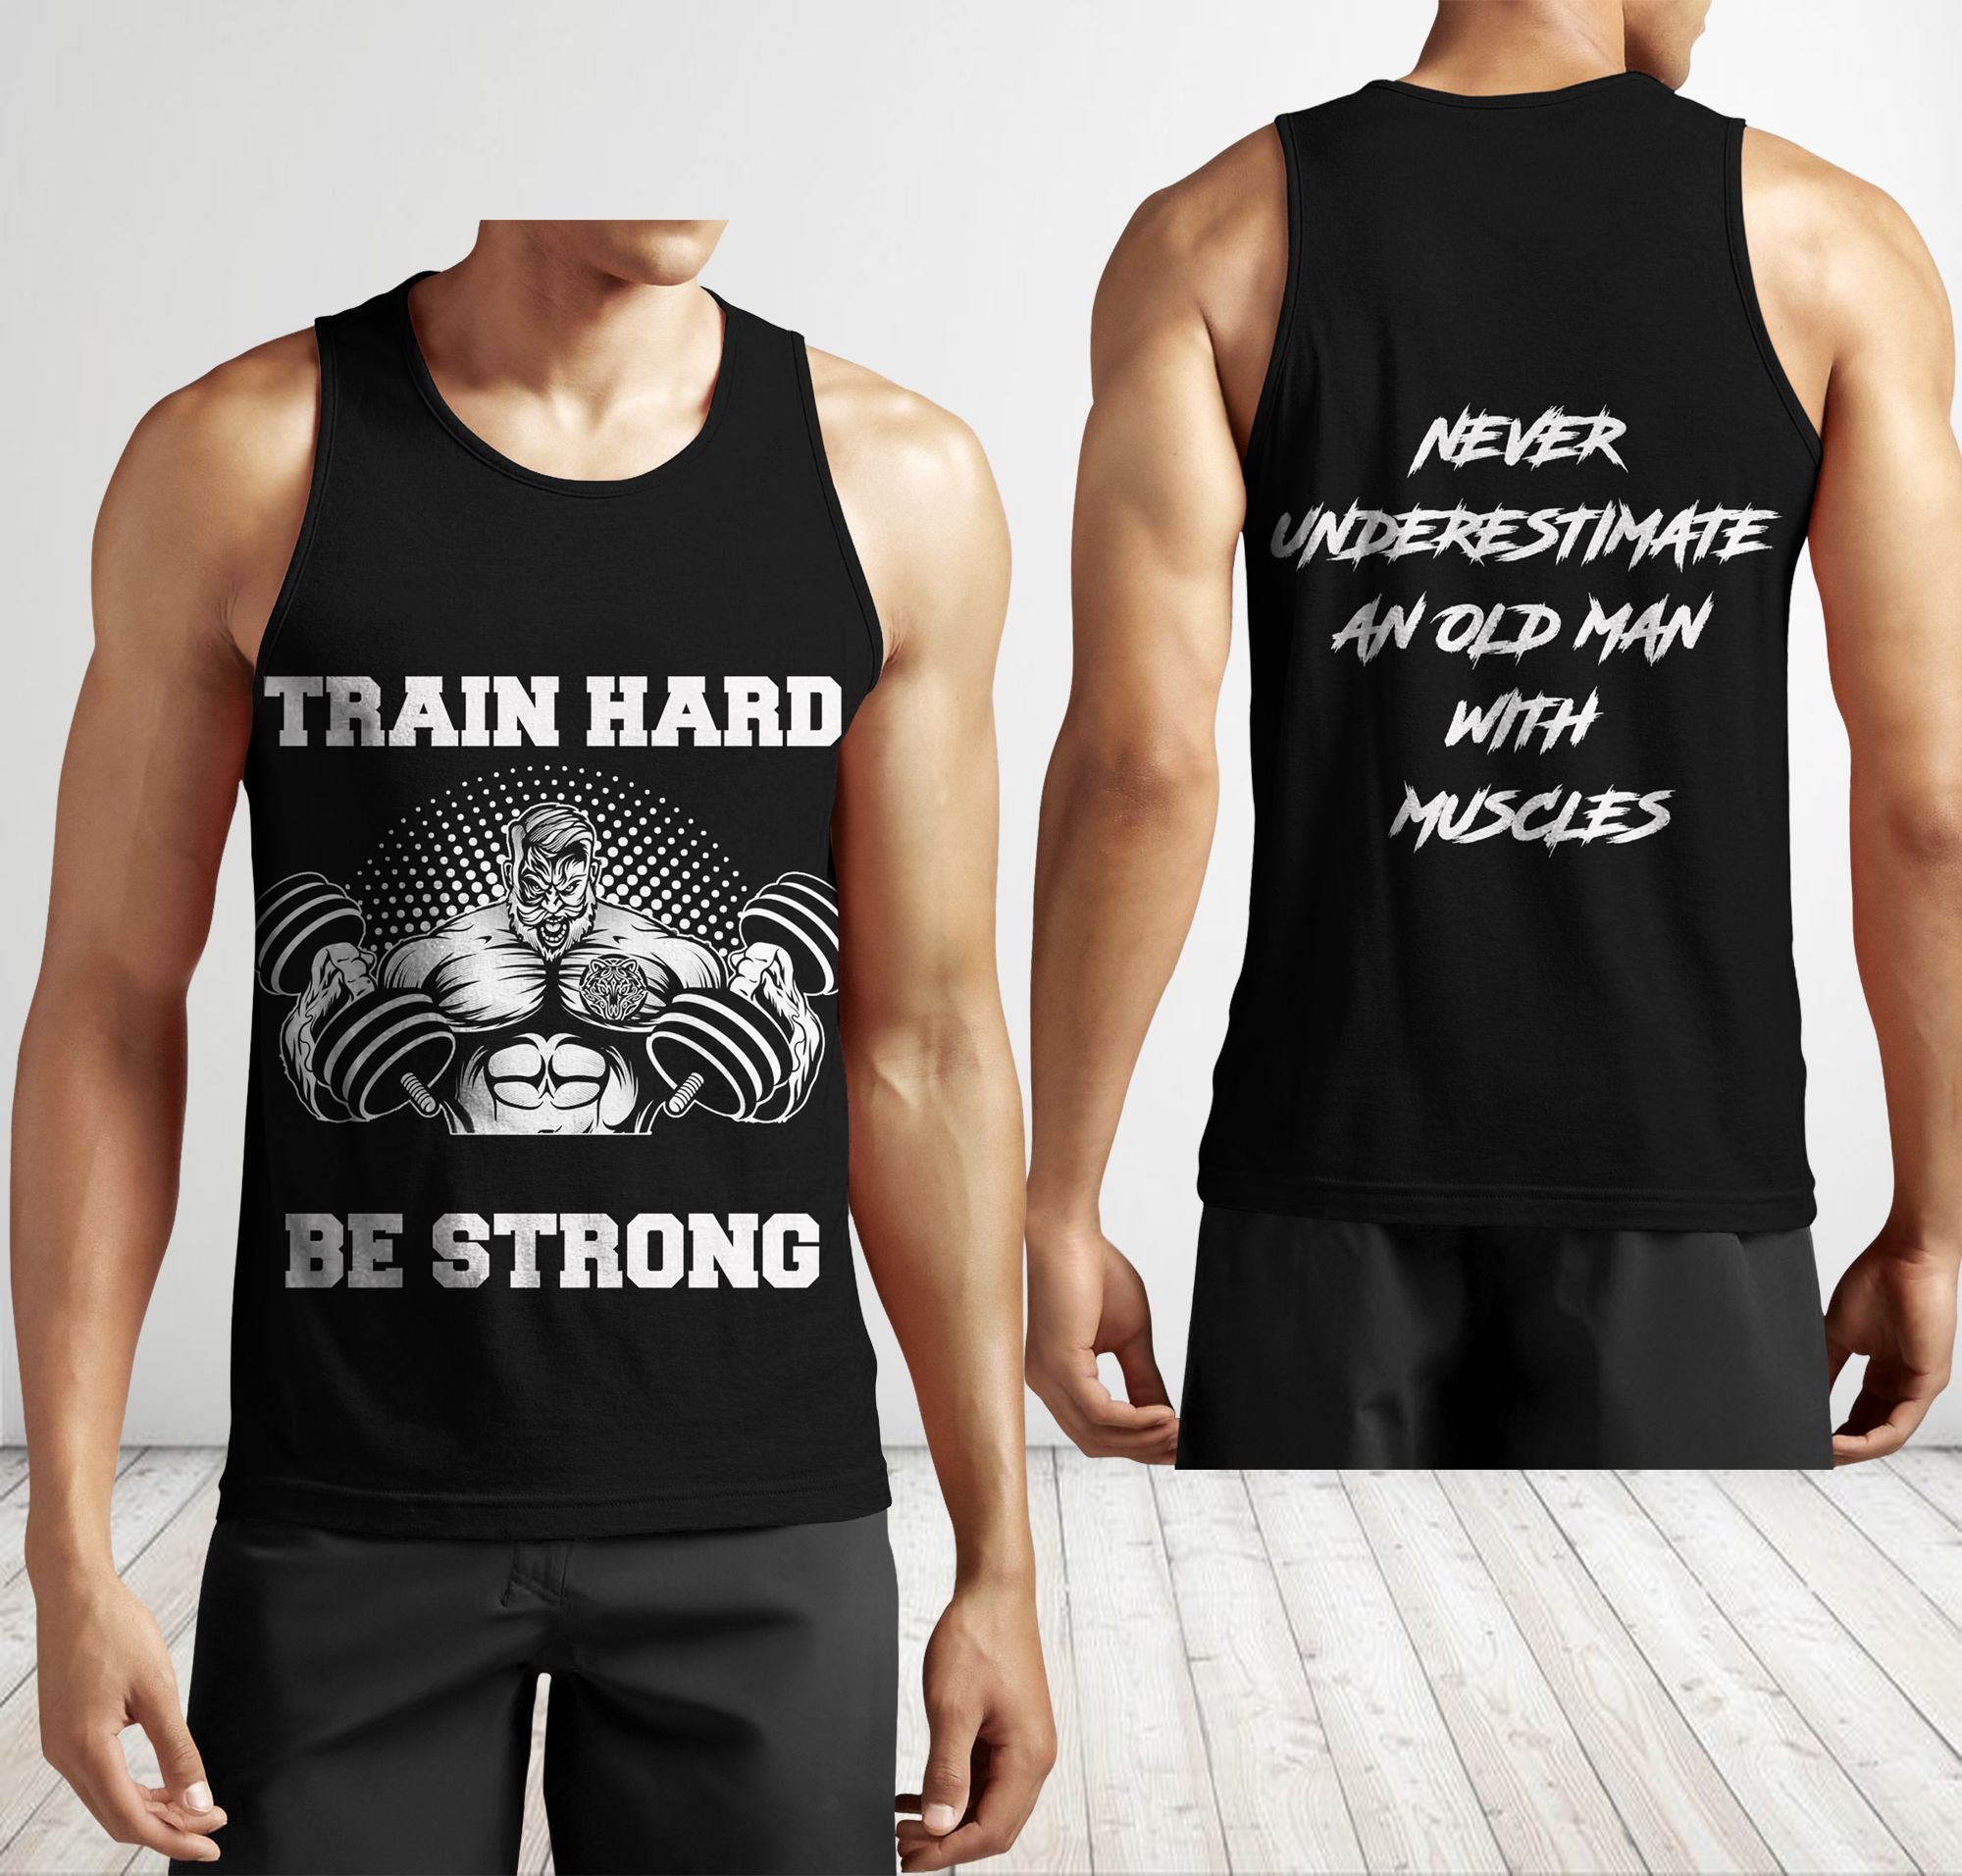 Men Gym Tank Tops Motivational Shirts Old Man With Muscles